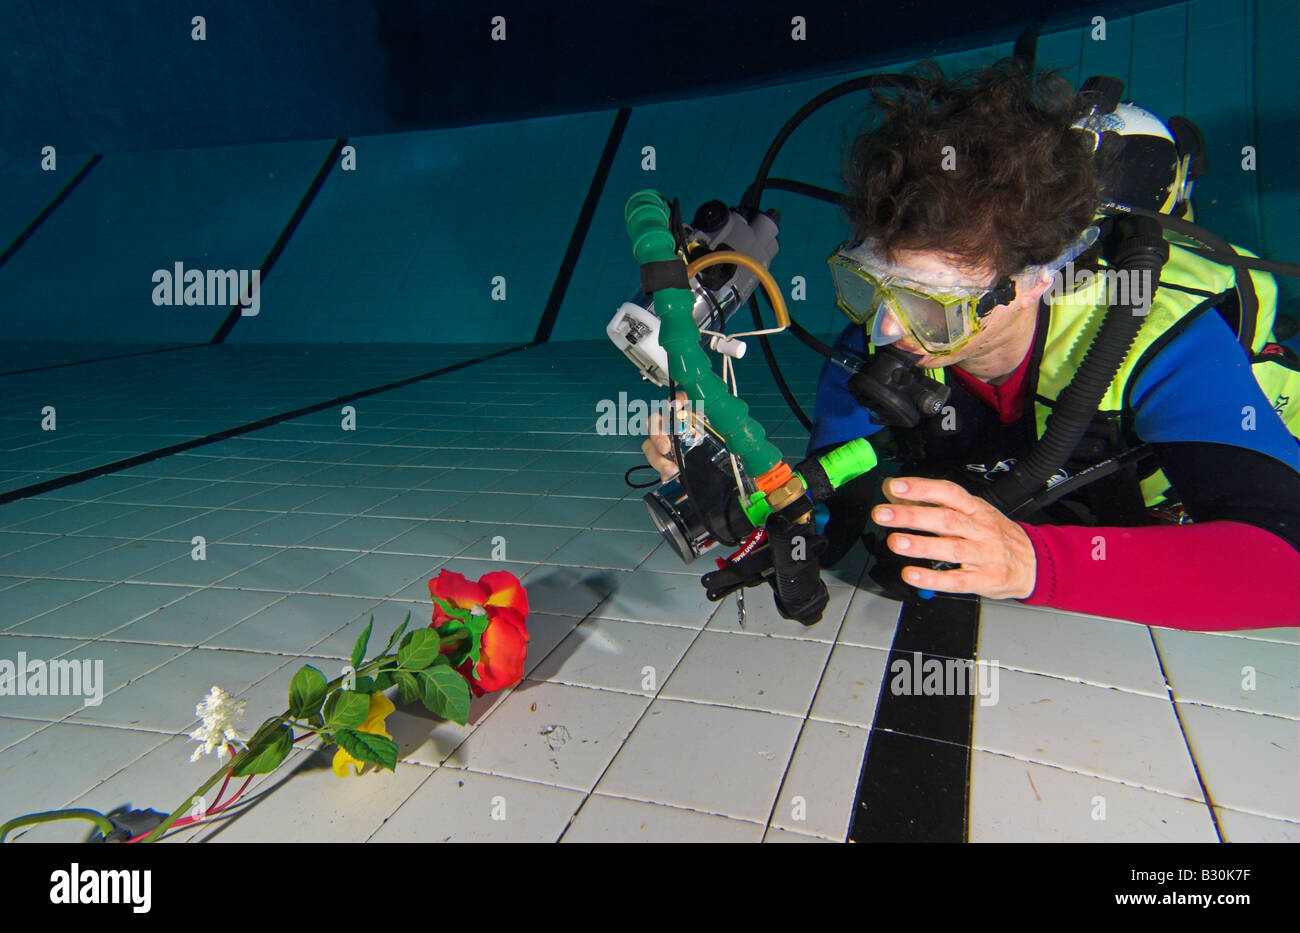 Woman scuba diver practices underwater photography in swimming pool Stock Photo